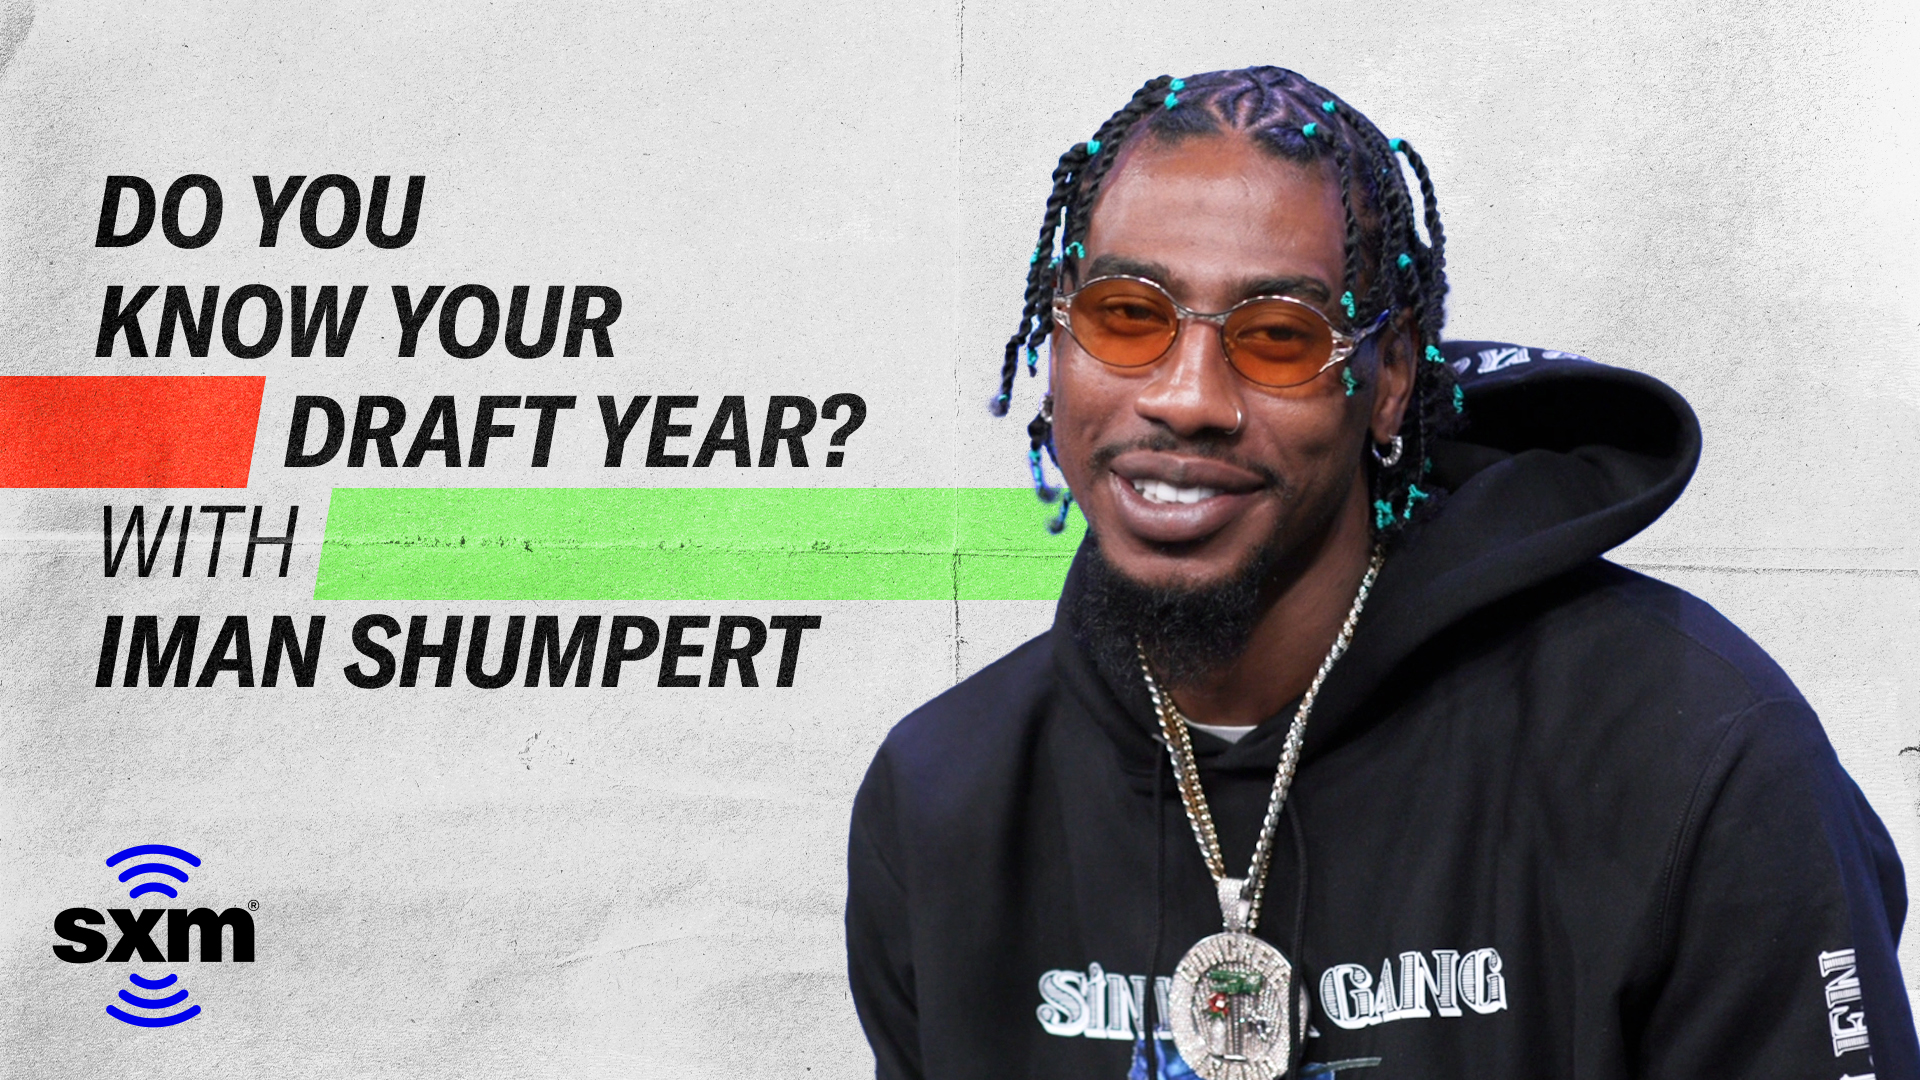 Do you know your draft year with Iman Shumpert